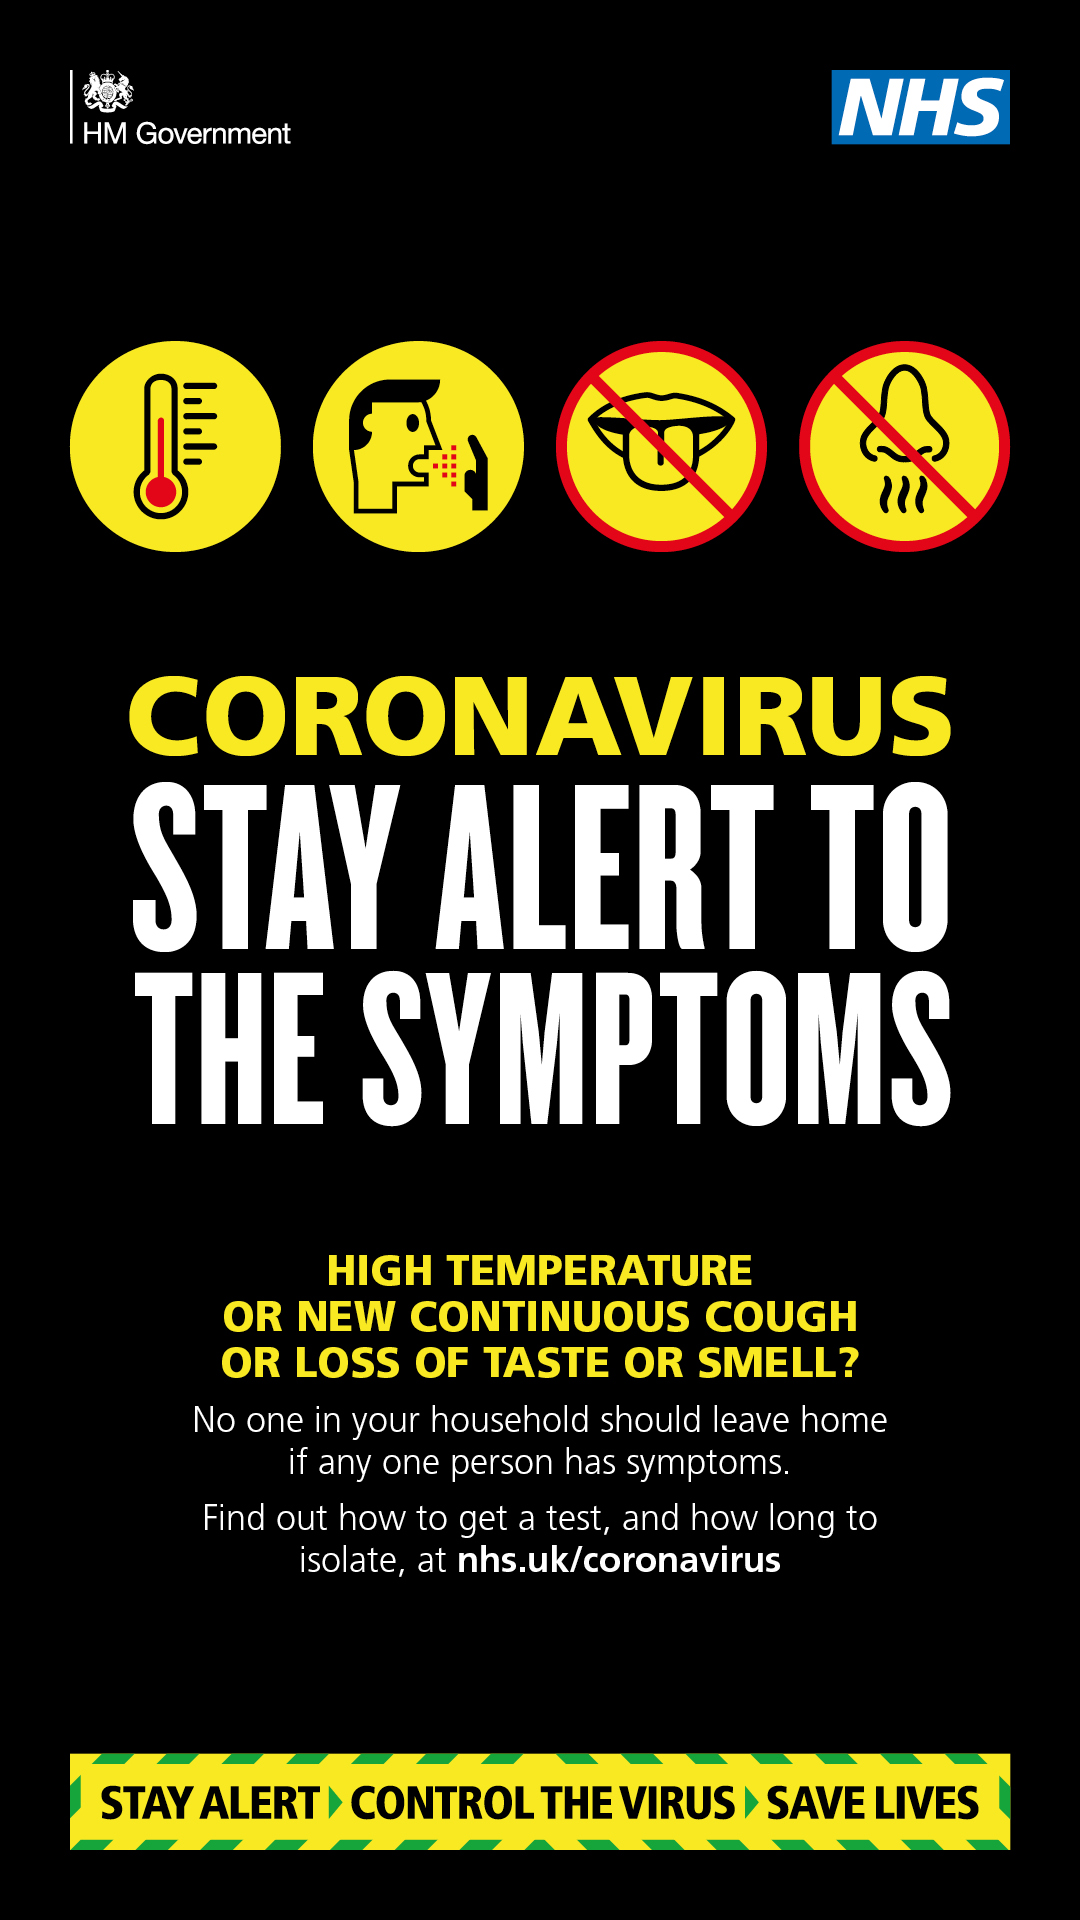 Coronavirus Updated Symptoms, High Temperature, New Continuous Cough or Loss of Taste or Smell